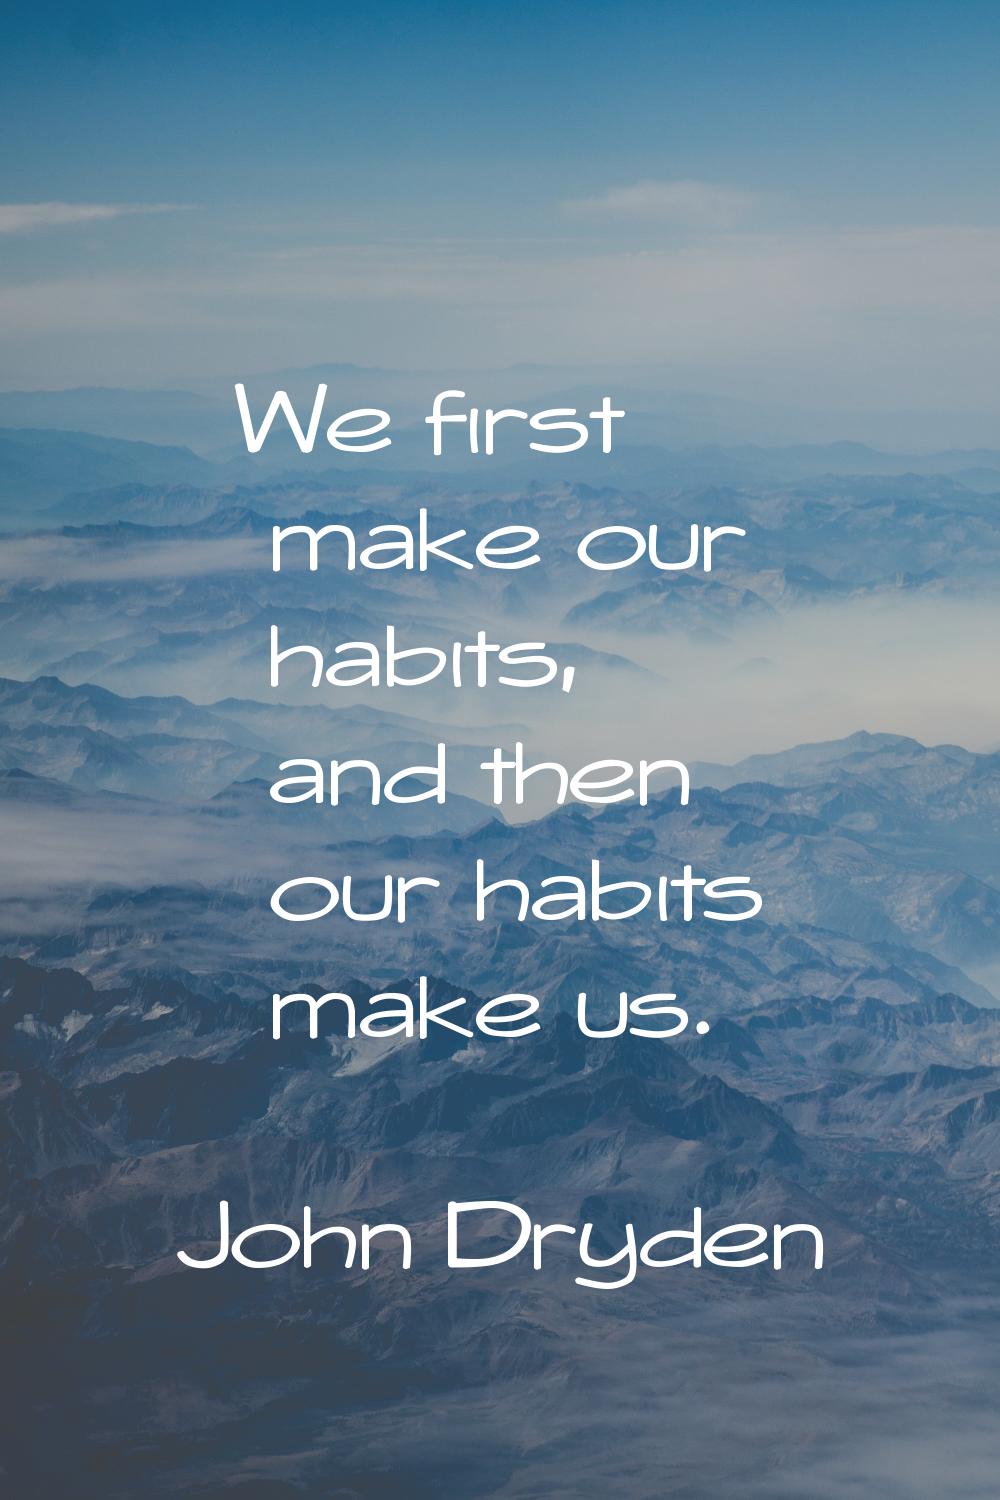 We first make our habits, and then our habits make us.